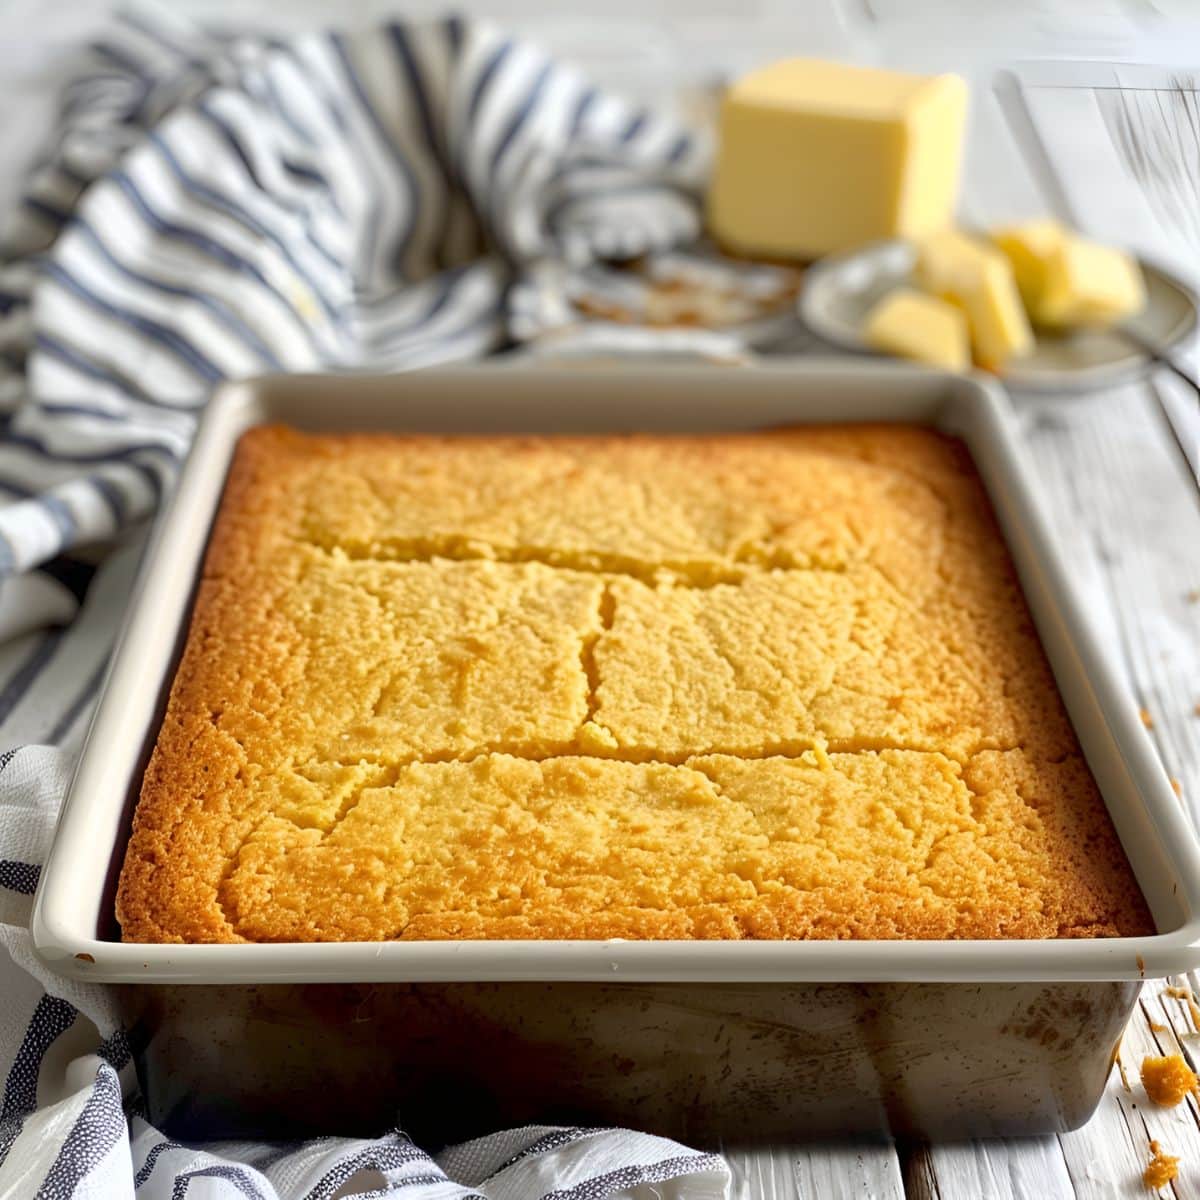 Marie Callender's Cornbread in a Pan with Butter on a Plate in the Background